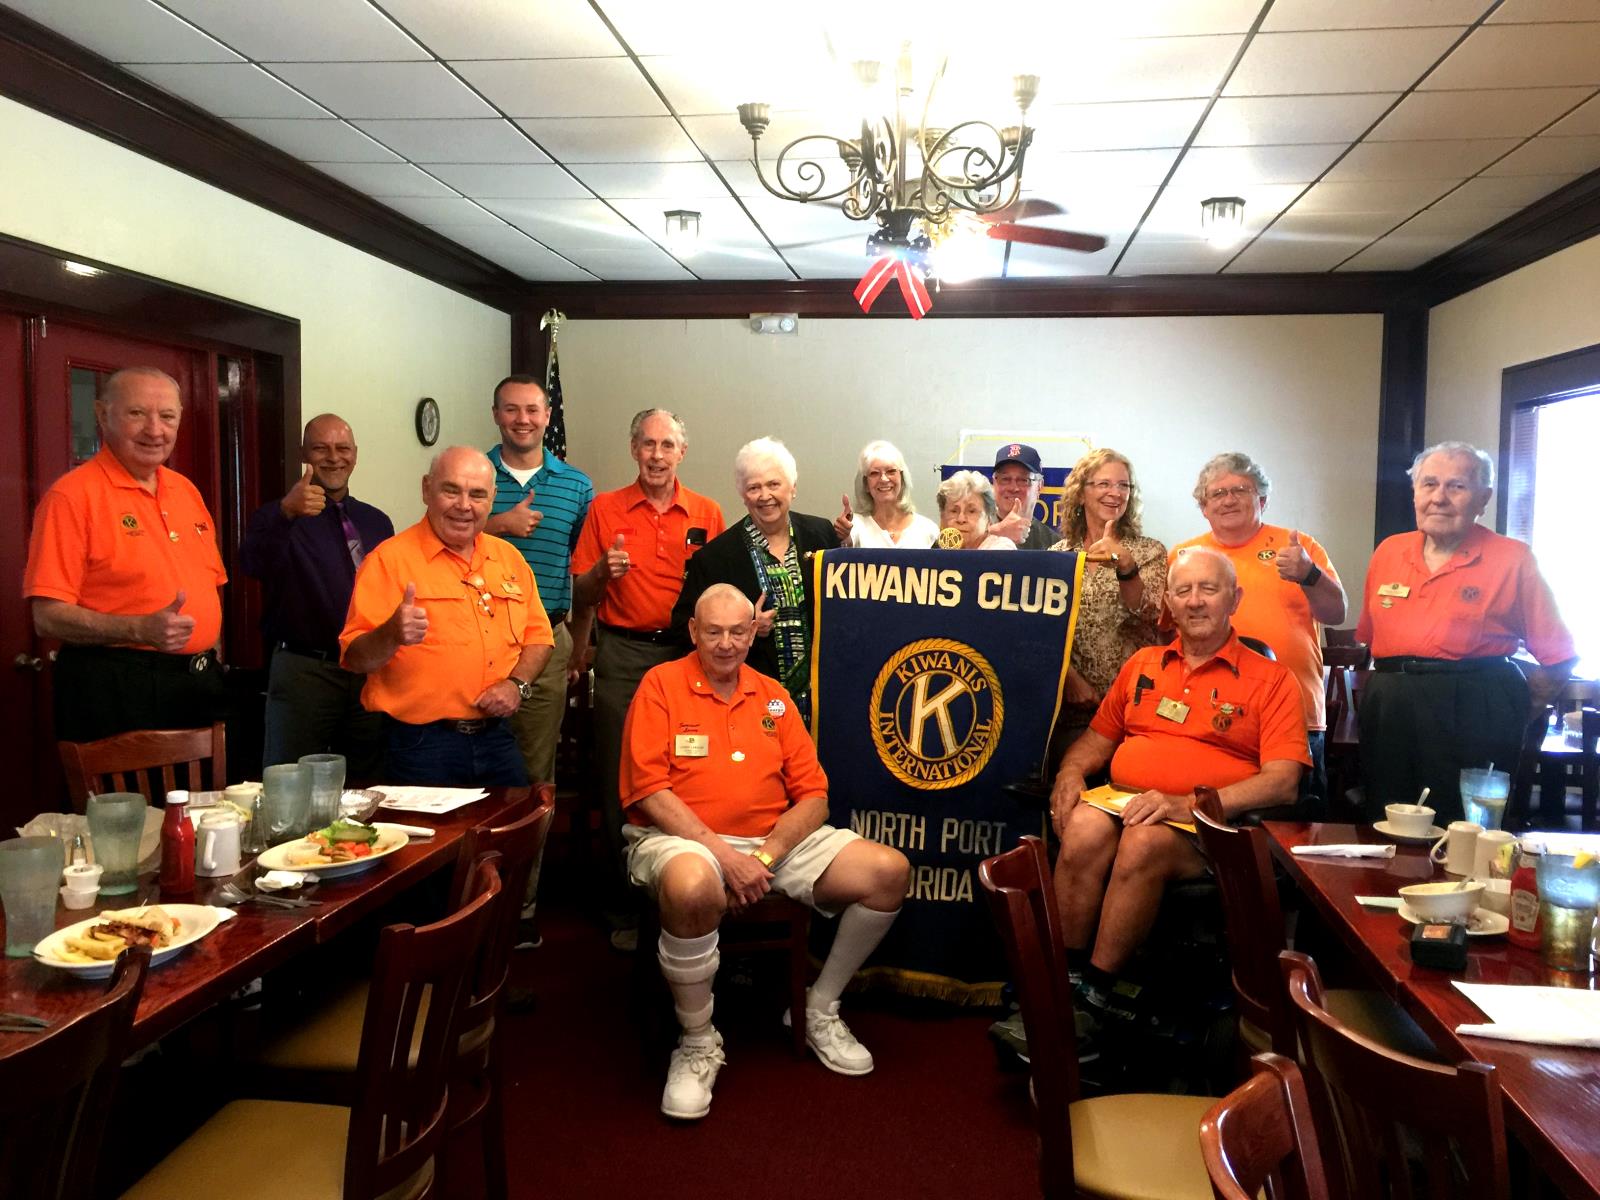 Members of the North Port chapter of the Kiwanis Club